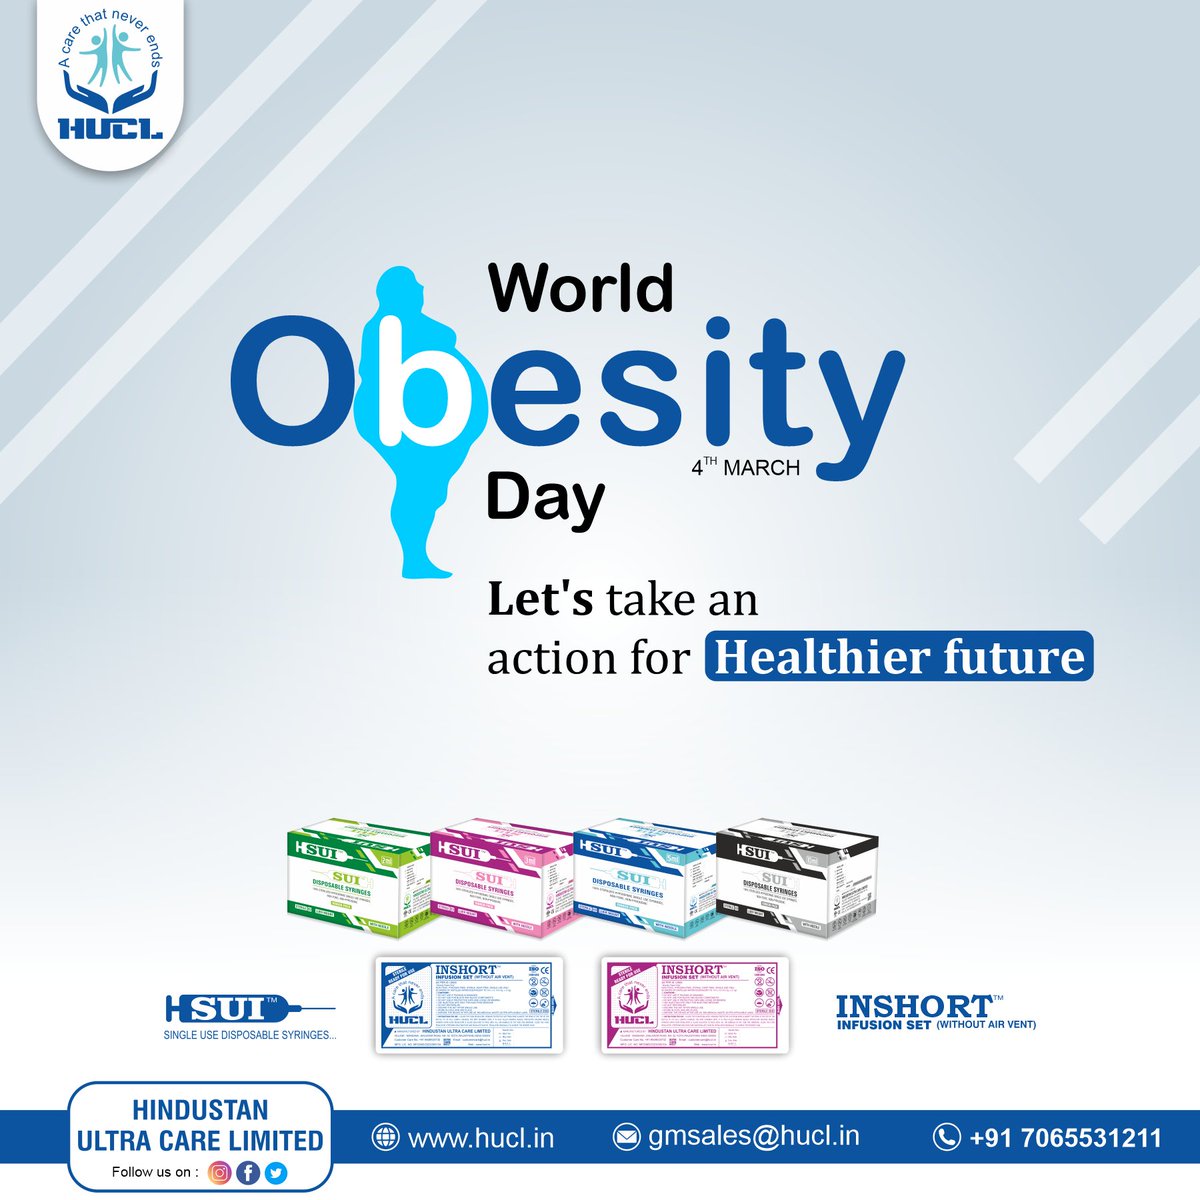 WORLD OBESITY DAY
Let's take an action for healthier future

hucl.in
facebook.com/HUCLimited
instagram.com/huclimited/

#obesity #healthy #insulin #healthyfood
#WorldObesityDay #EndWeightStigma 
#worldobesityfederation #syringes
#MedicalDevices